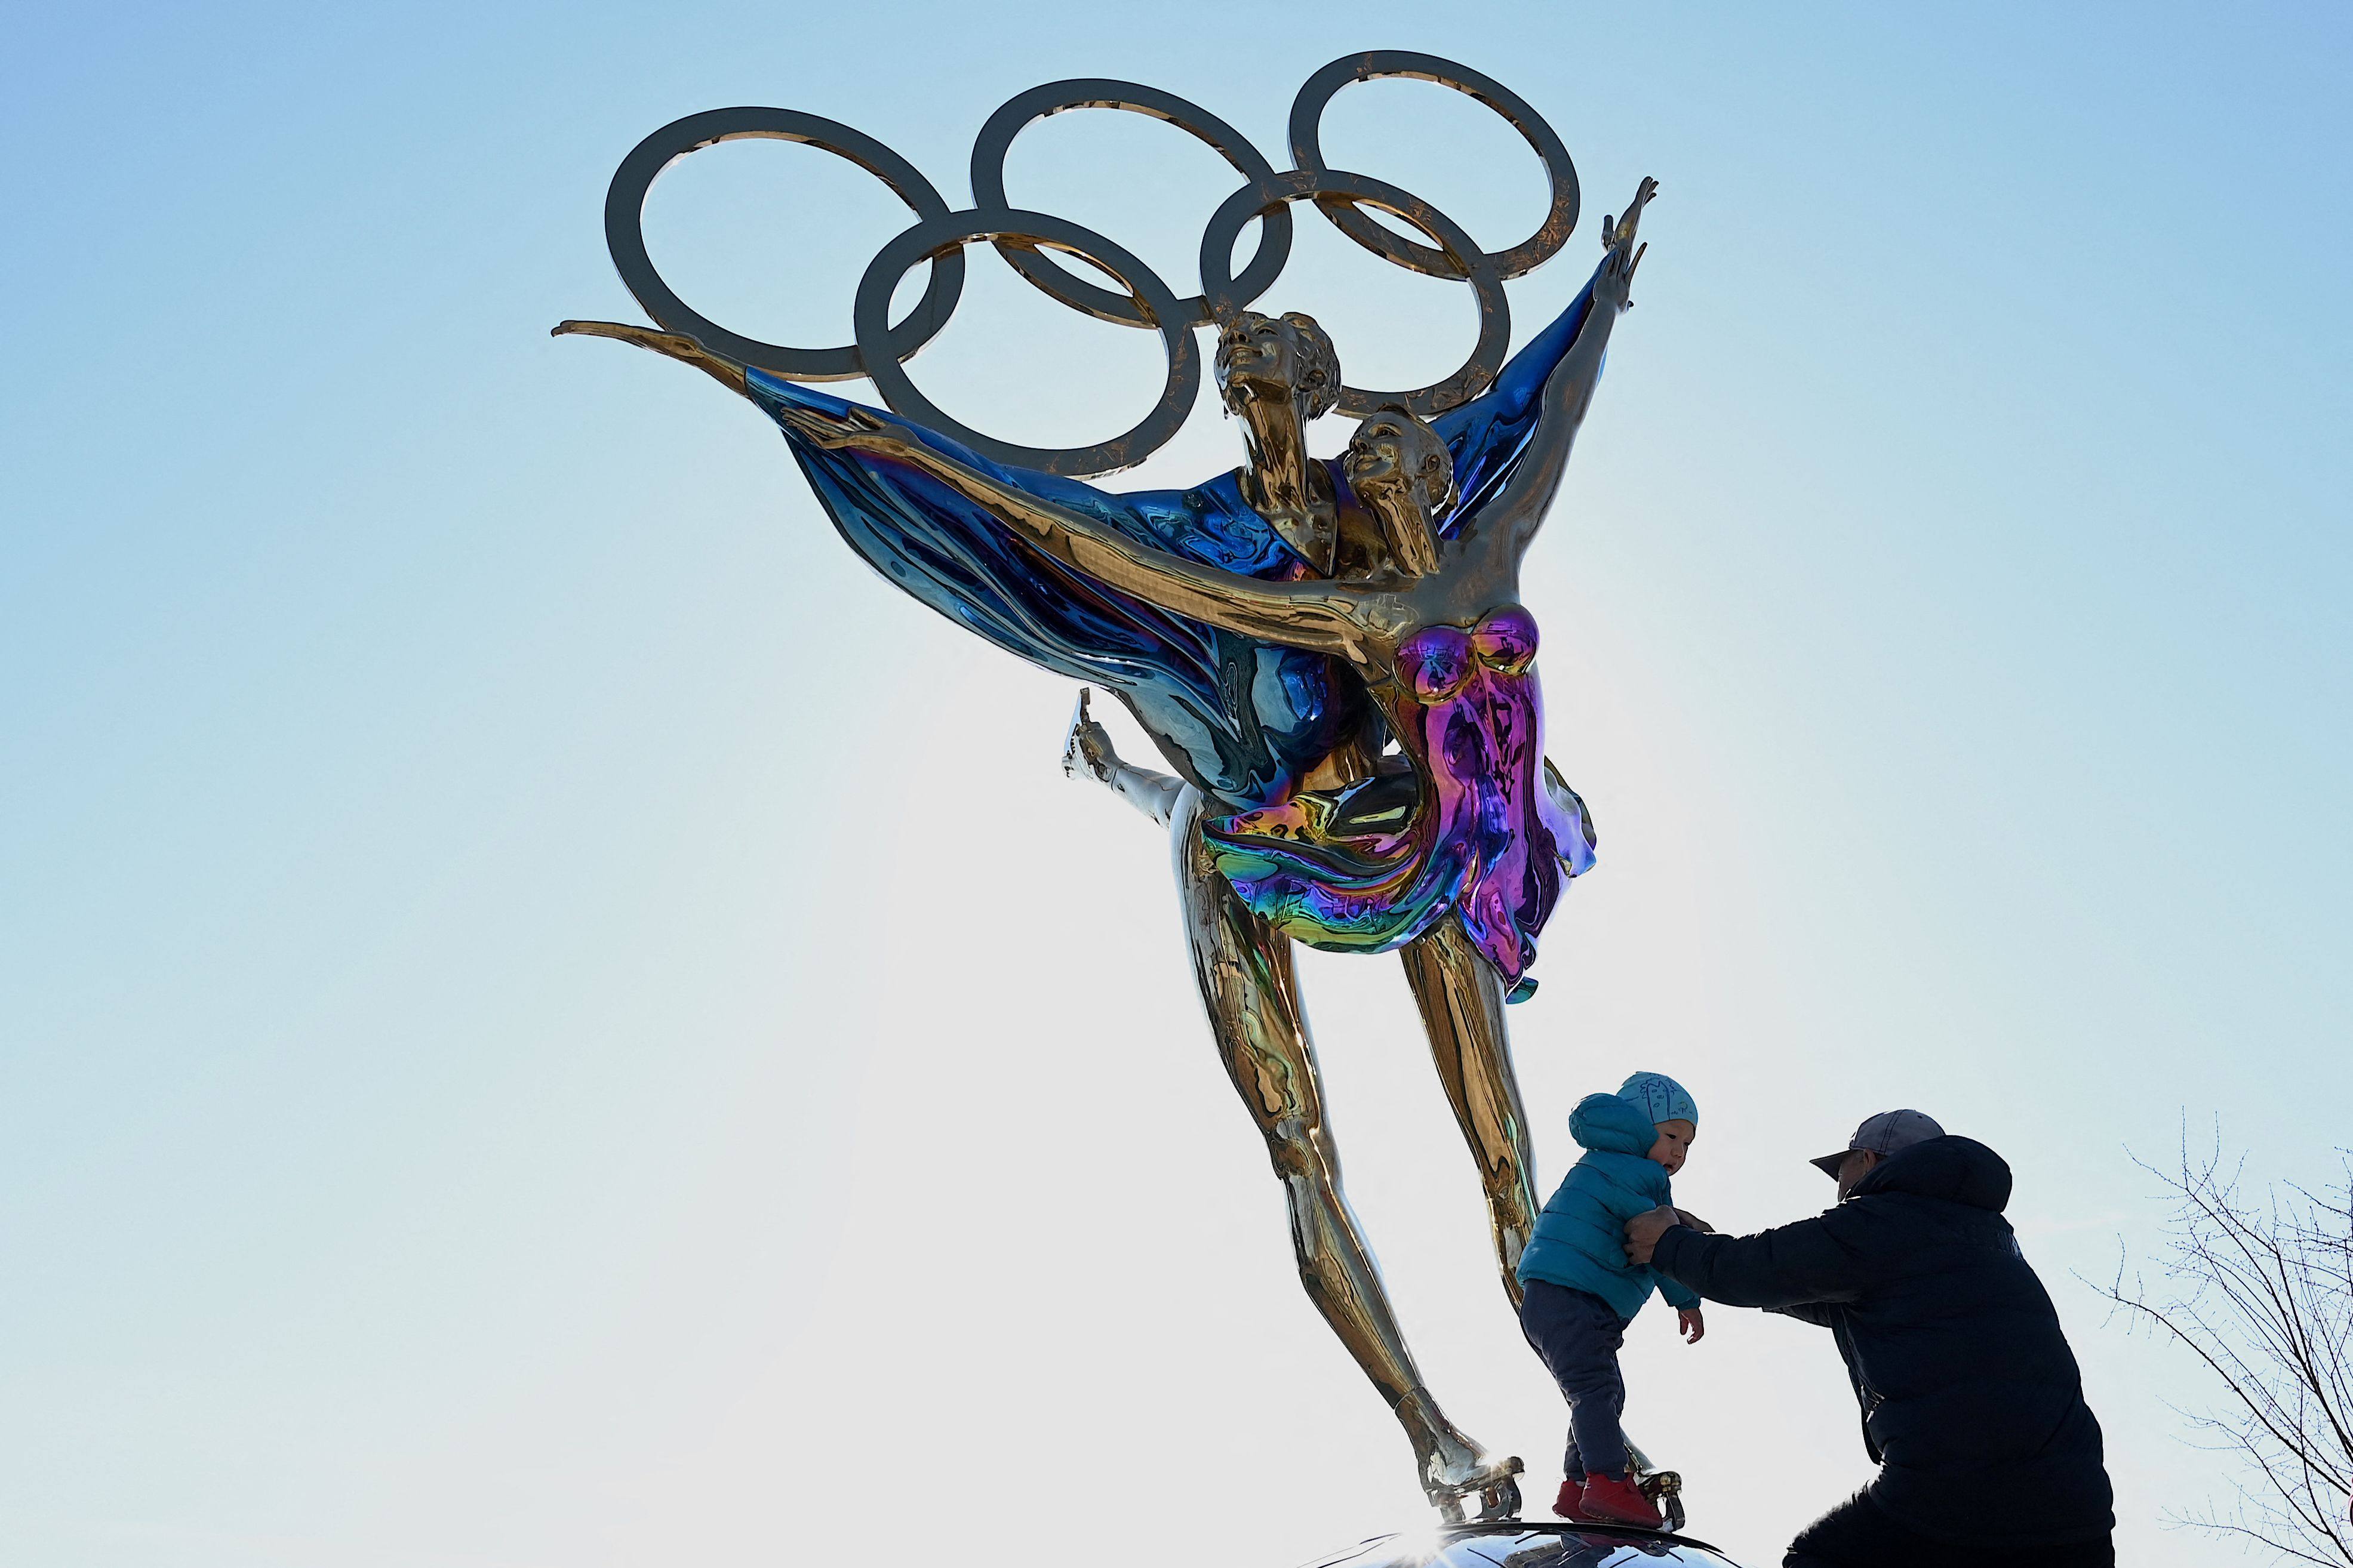 A child stands on a statue with the Olympic Rings titled “Dating With the Winter Olympics” by Huang Jian, near the headquarters of the Beijing Organizing Committee in Shougang Park. Photo by Noel Celis / AFP